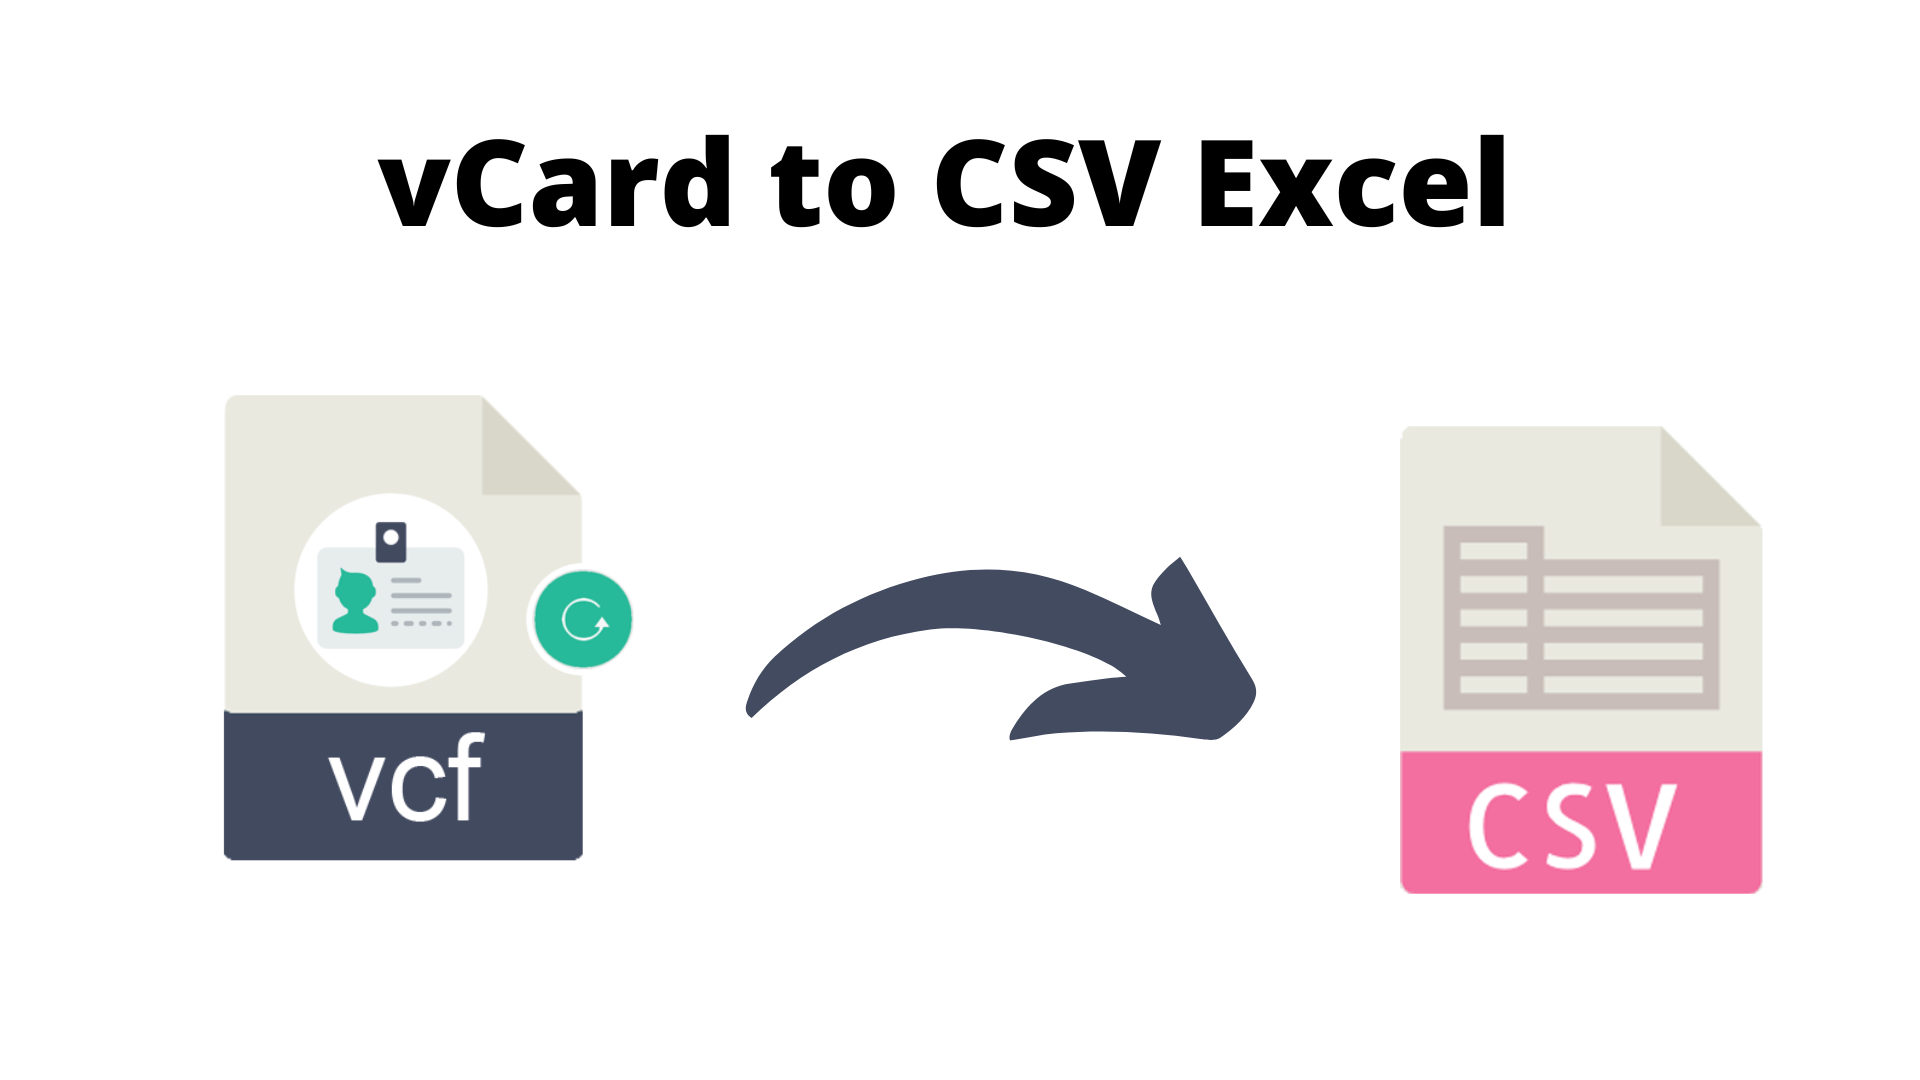 vCard to CSV Excel